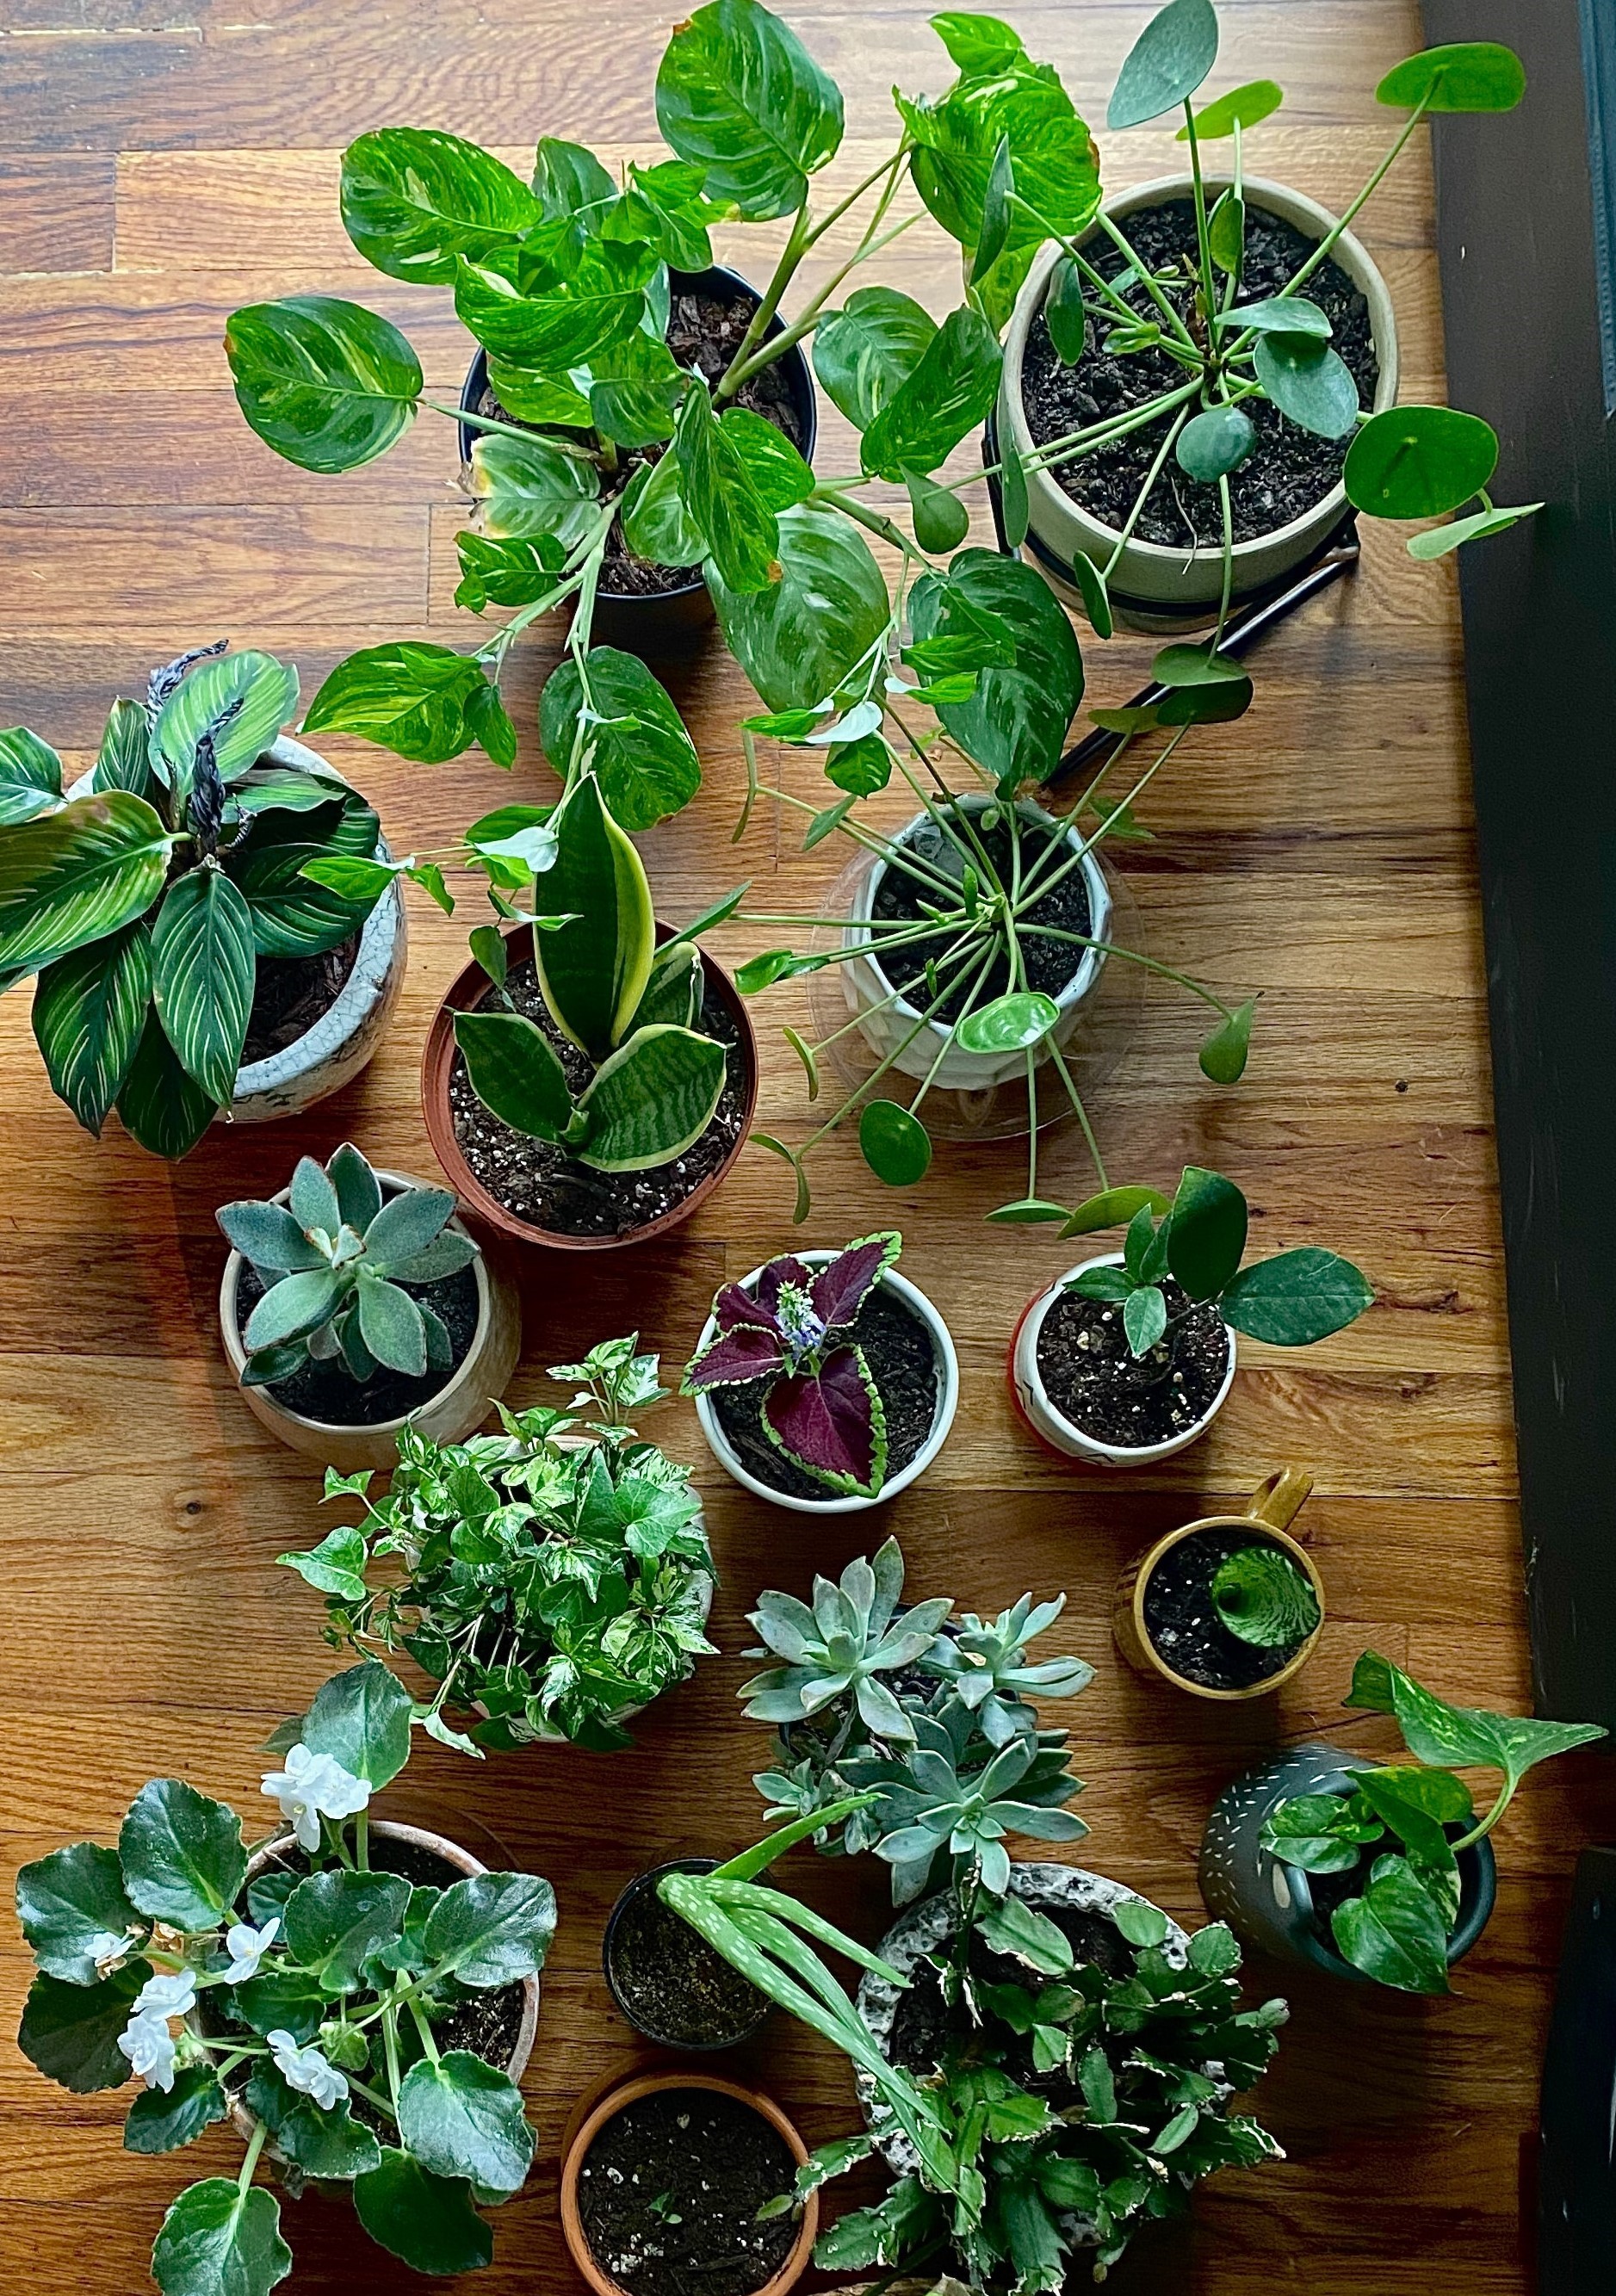 Collection of houseplants on wooden surface